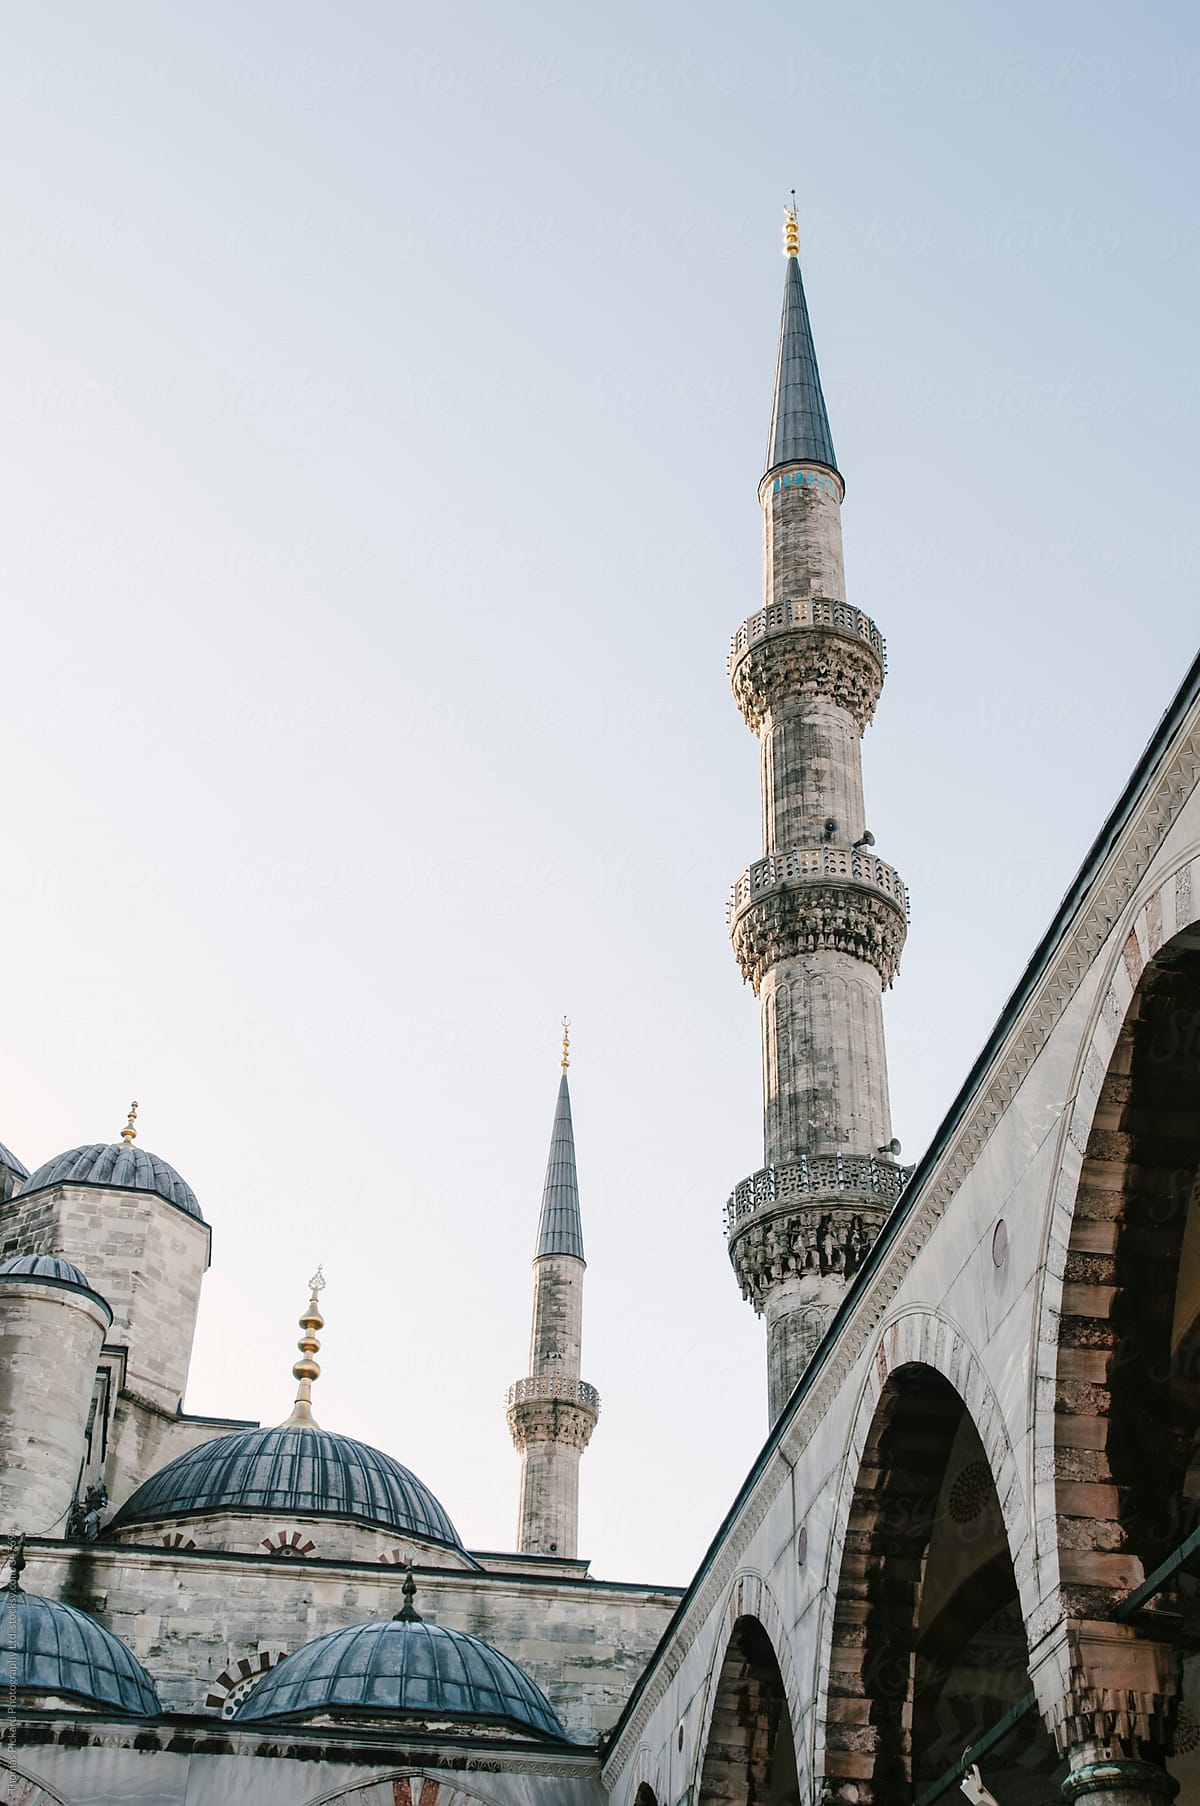 Minarets of the Blue Mosque, Istanbul Turkey.